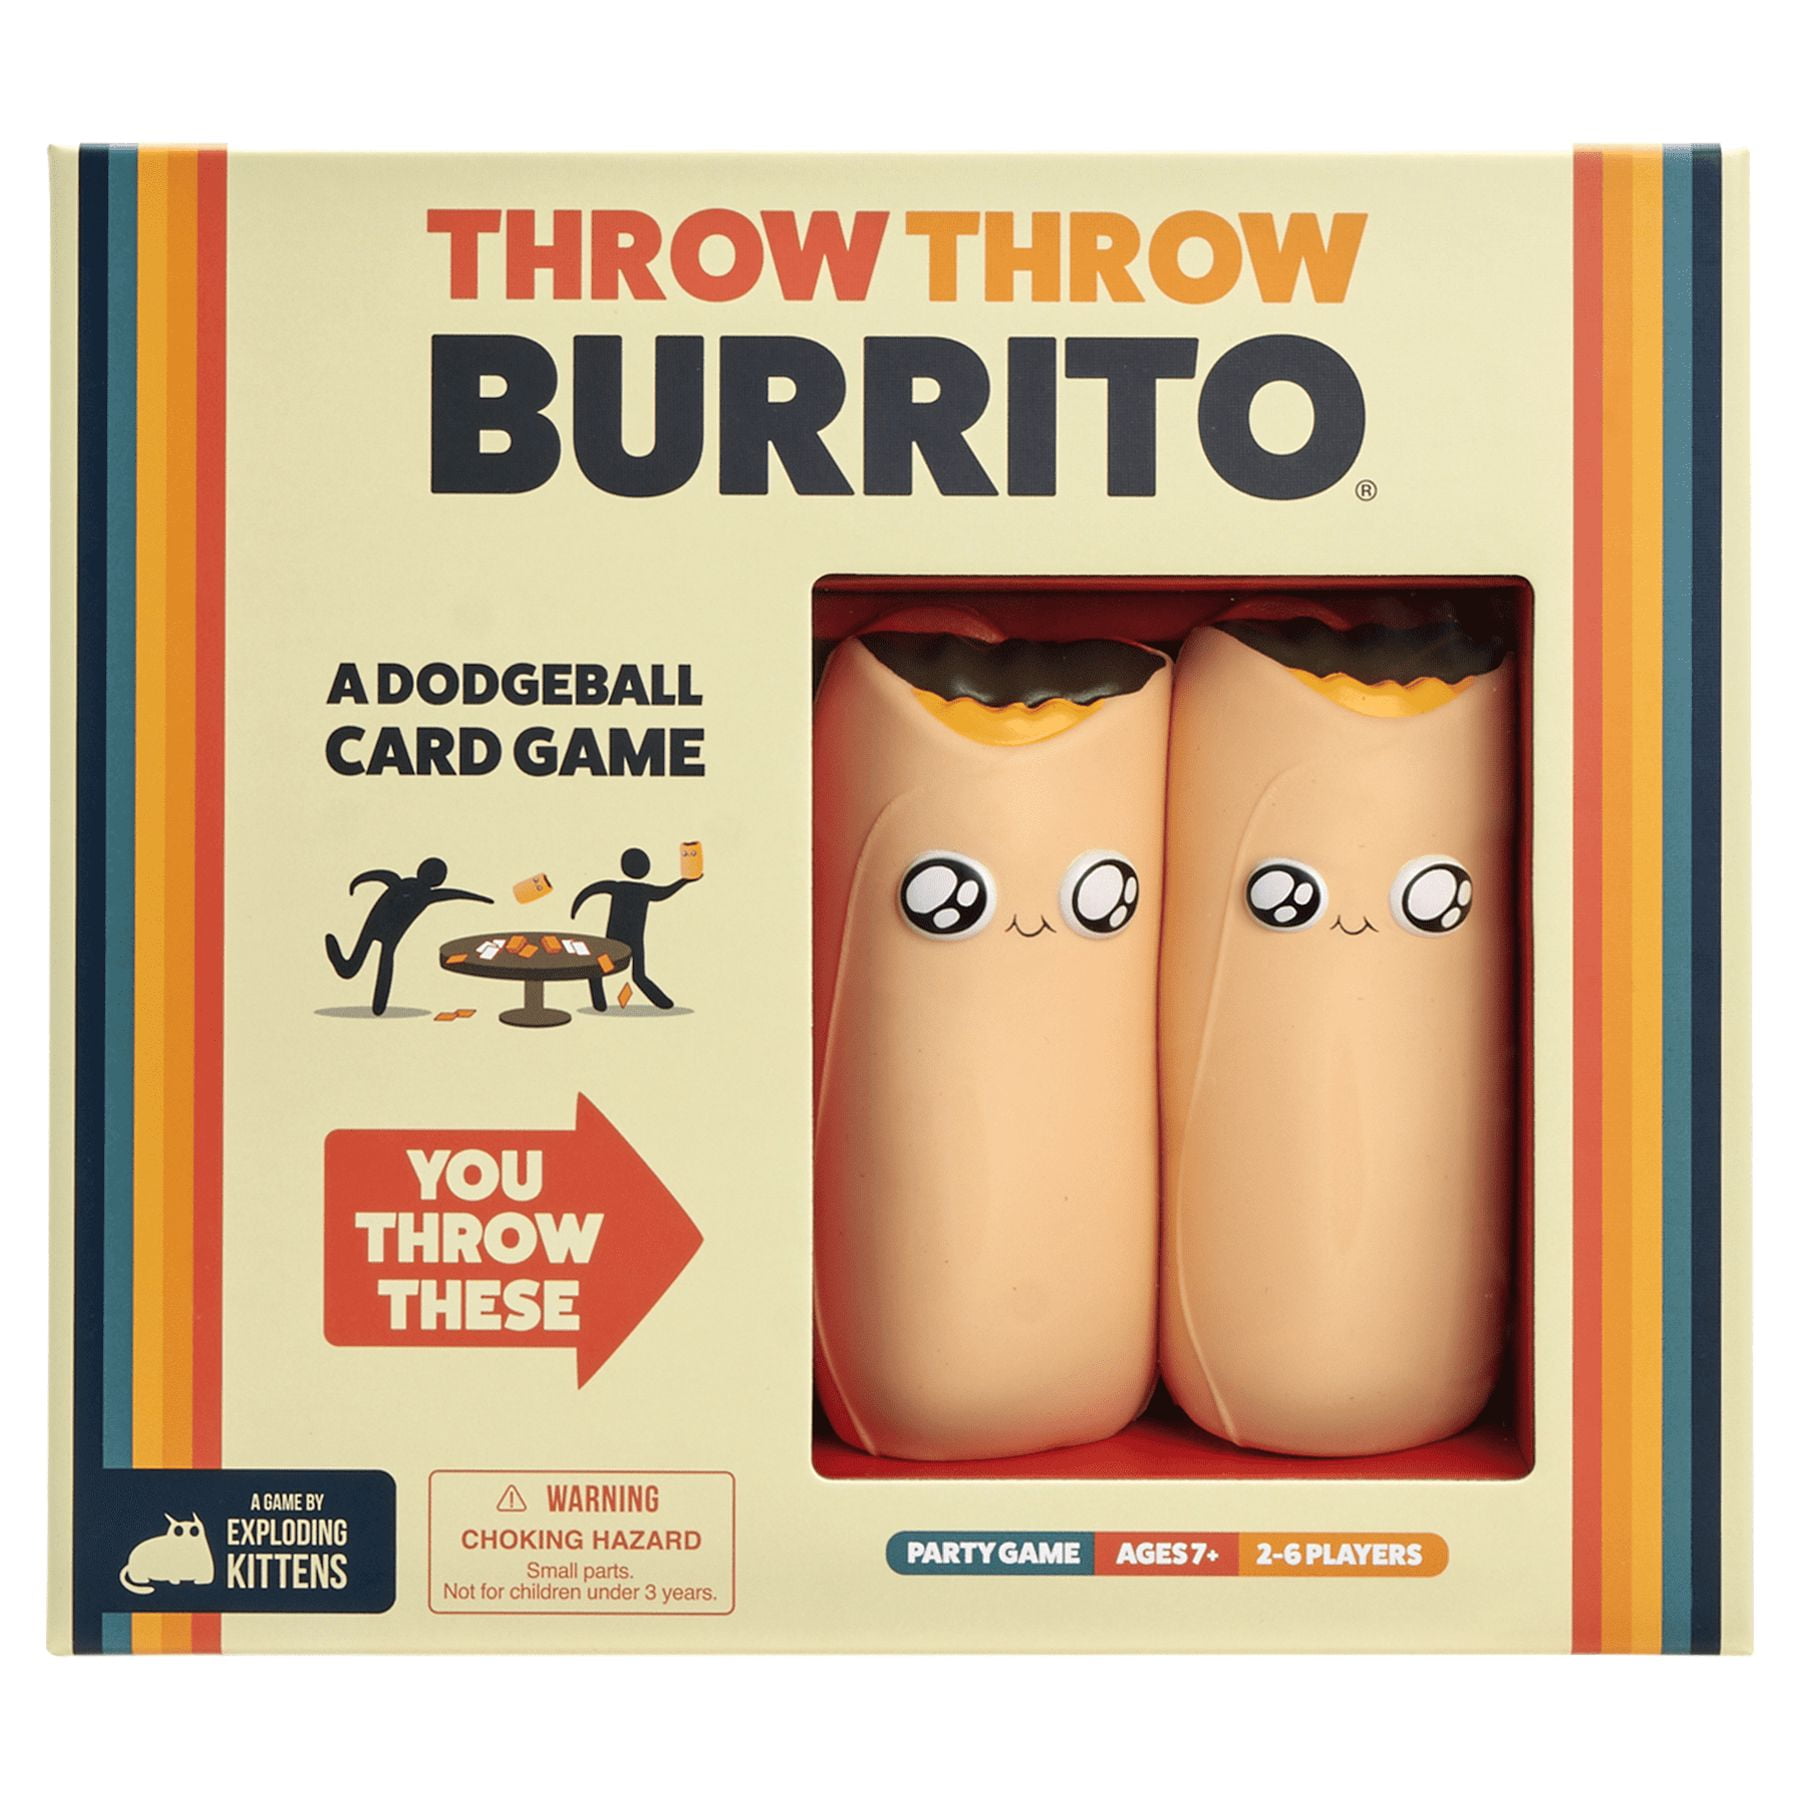 Exploding Kittens unveils first tabletop word game, A Little Wordy